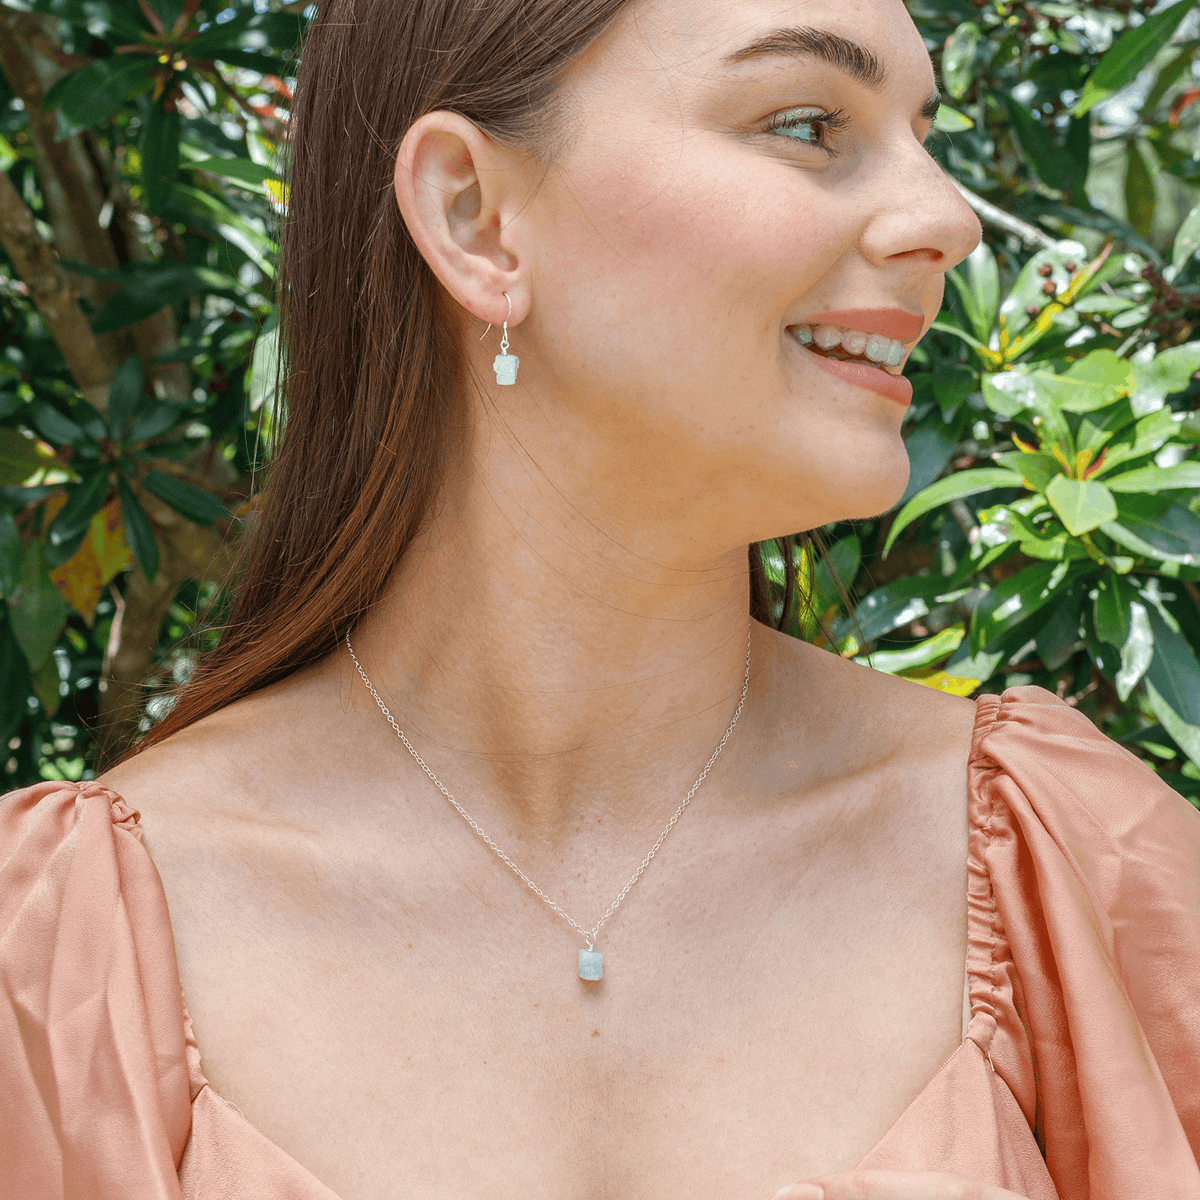 Raw Blue Lace Agate Crystal Earrings & Necklace Set - Raw Blue Lace Agate Crystal Earrings & Necklace Set - Sterling Silver - Luna Tide Handmade Crystal Jewellery